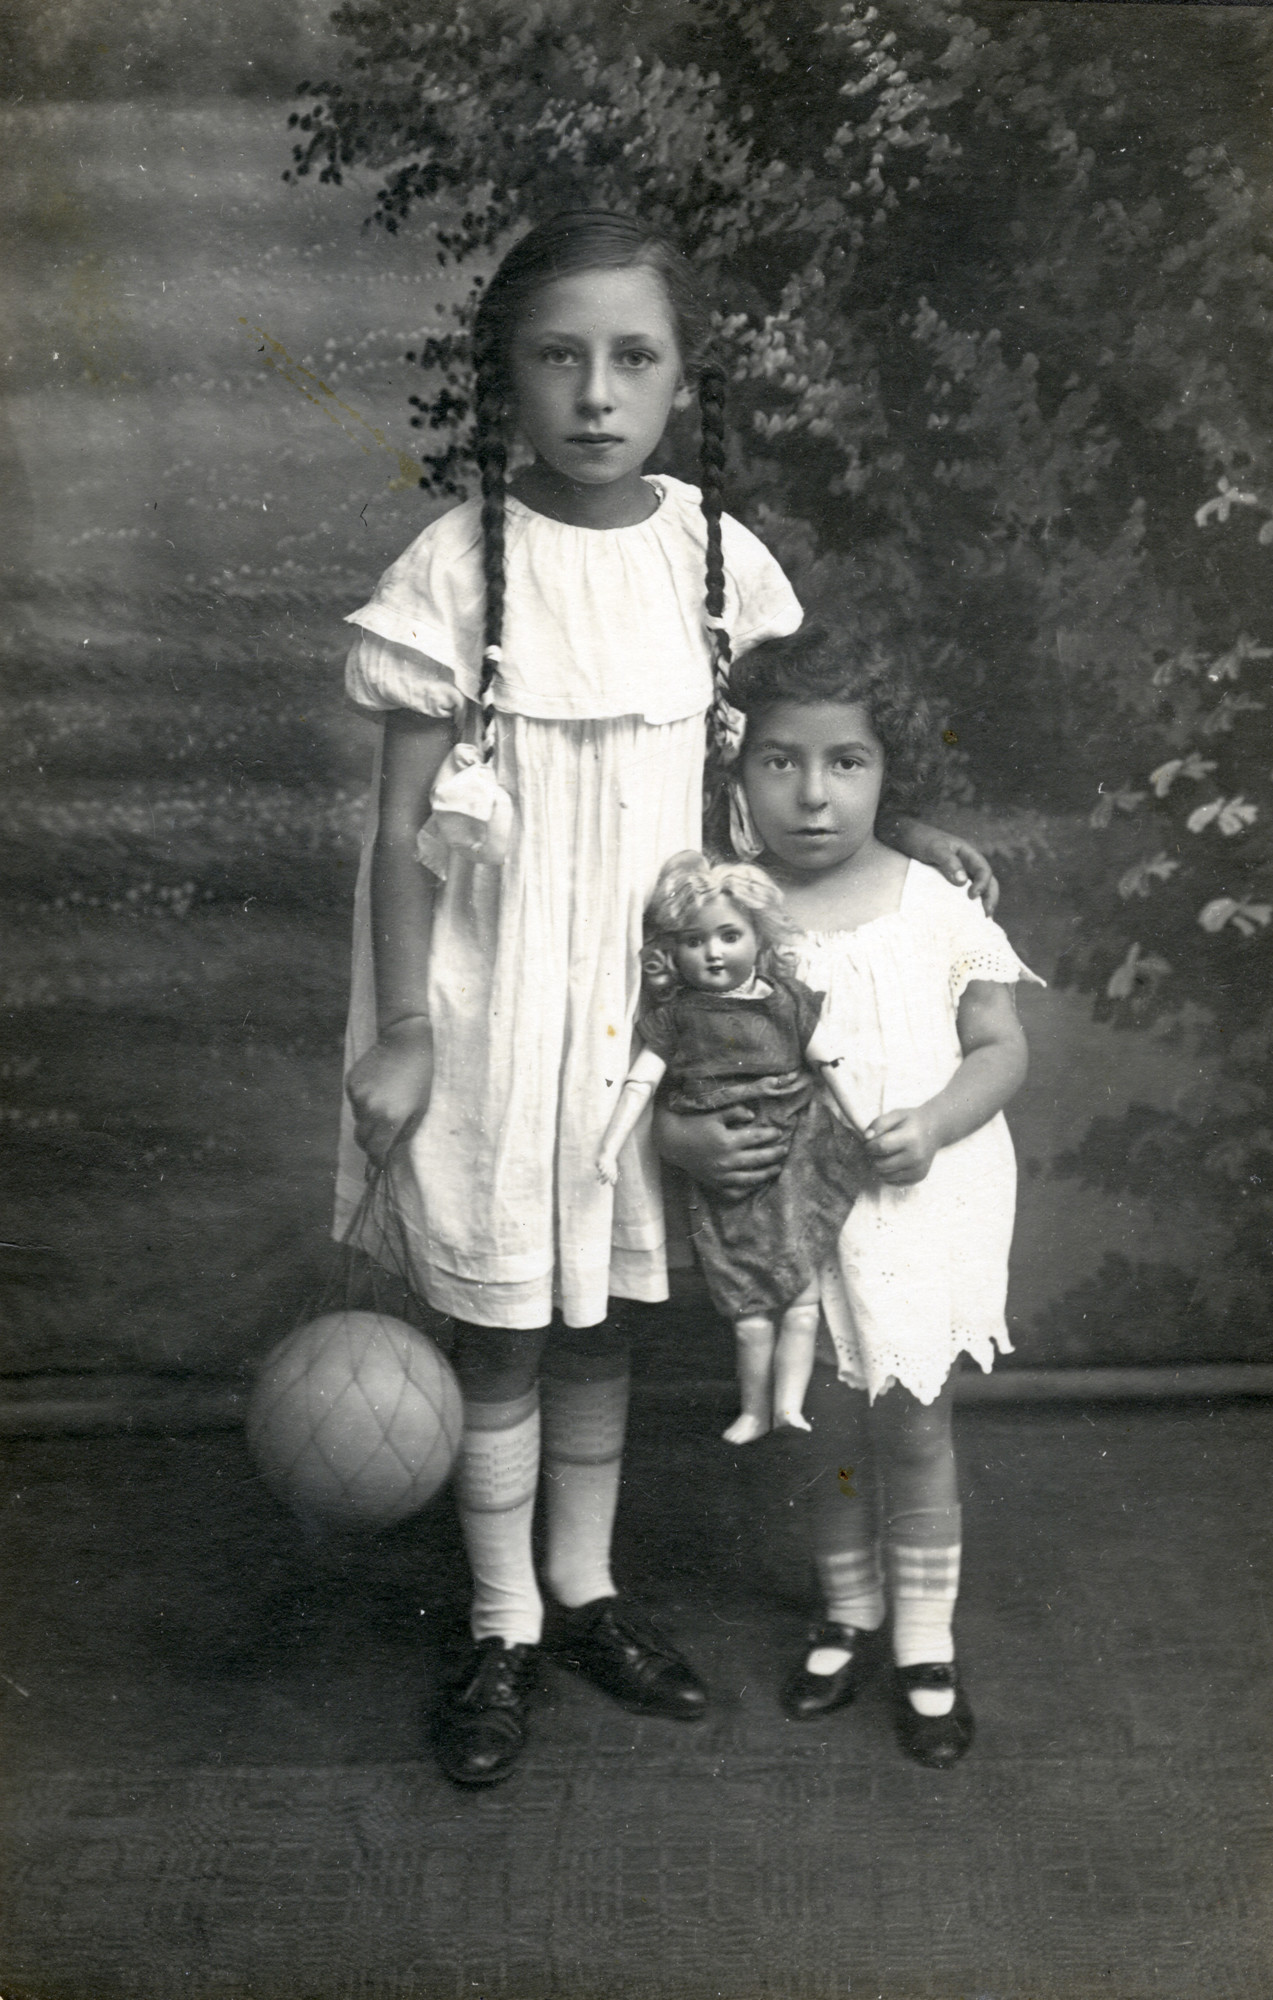 Studio portrait of the Muller sisters in Lida.

Pictured are Sheyna and Batya Muller.